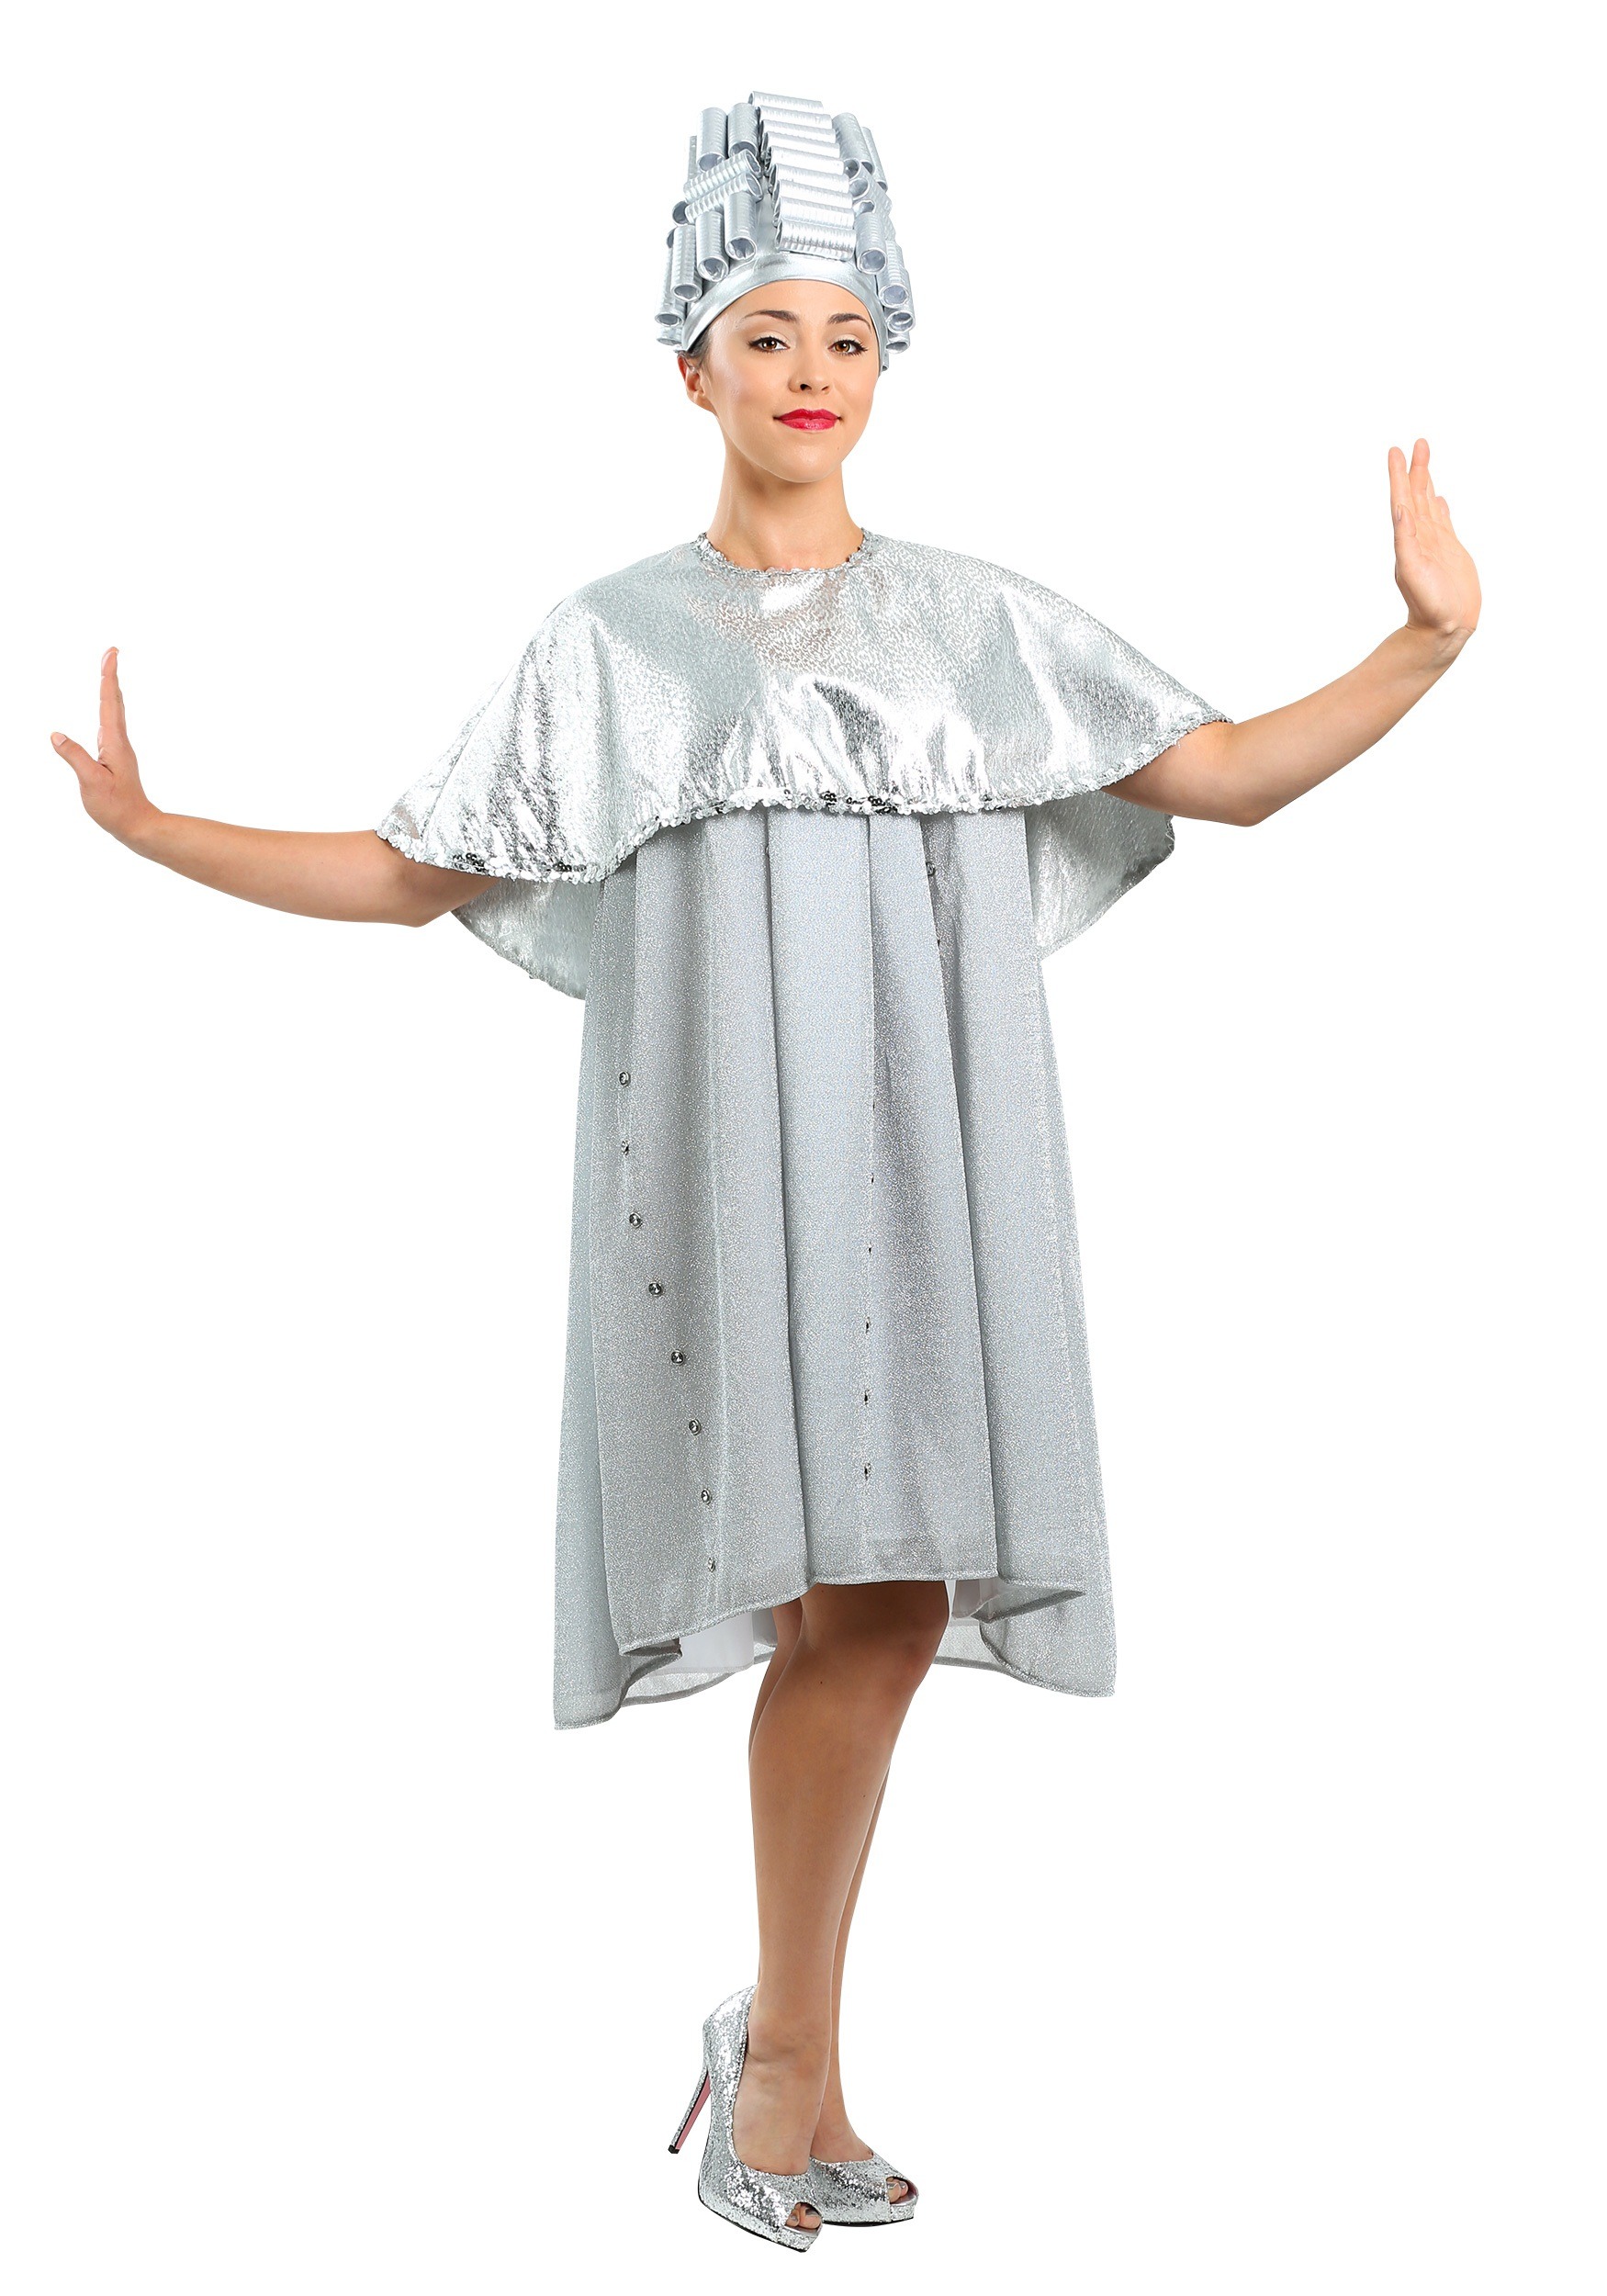 Photos - Fancy Dress FUN Costumes Plus Size Grease Beauty School Costume for Women | Grease Cos